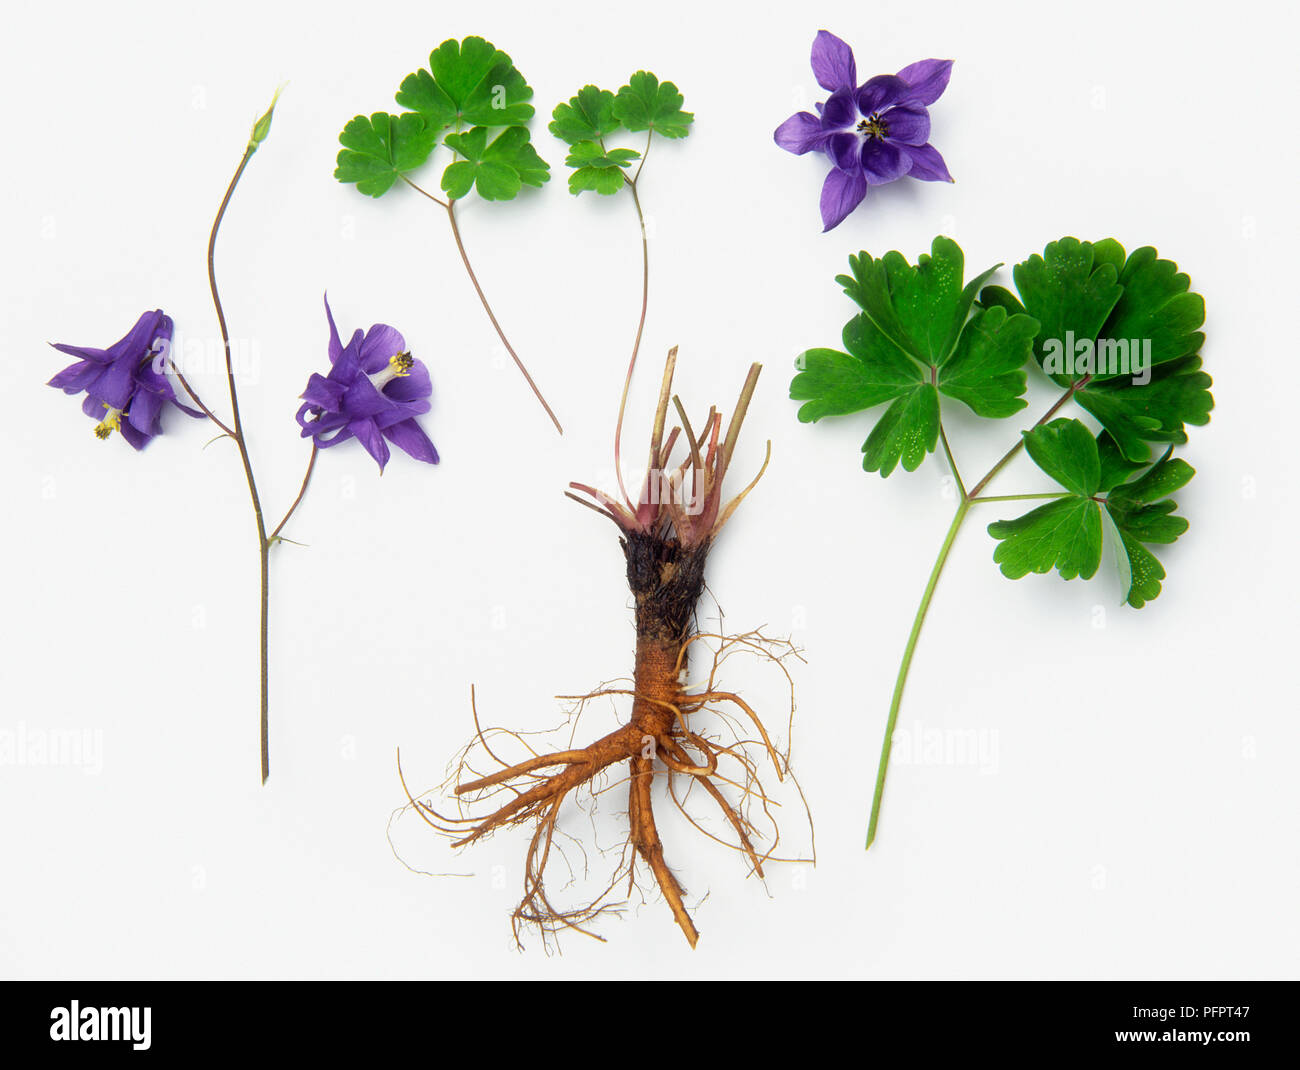 Roots, flowers and leaves from Aquilegia vulgaris (Columbine) Stock Photo